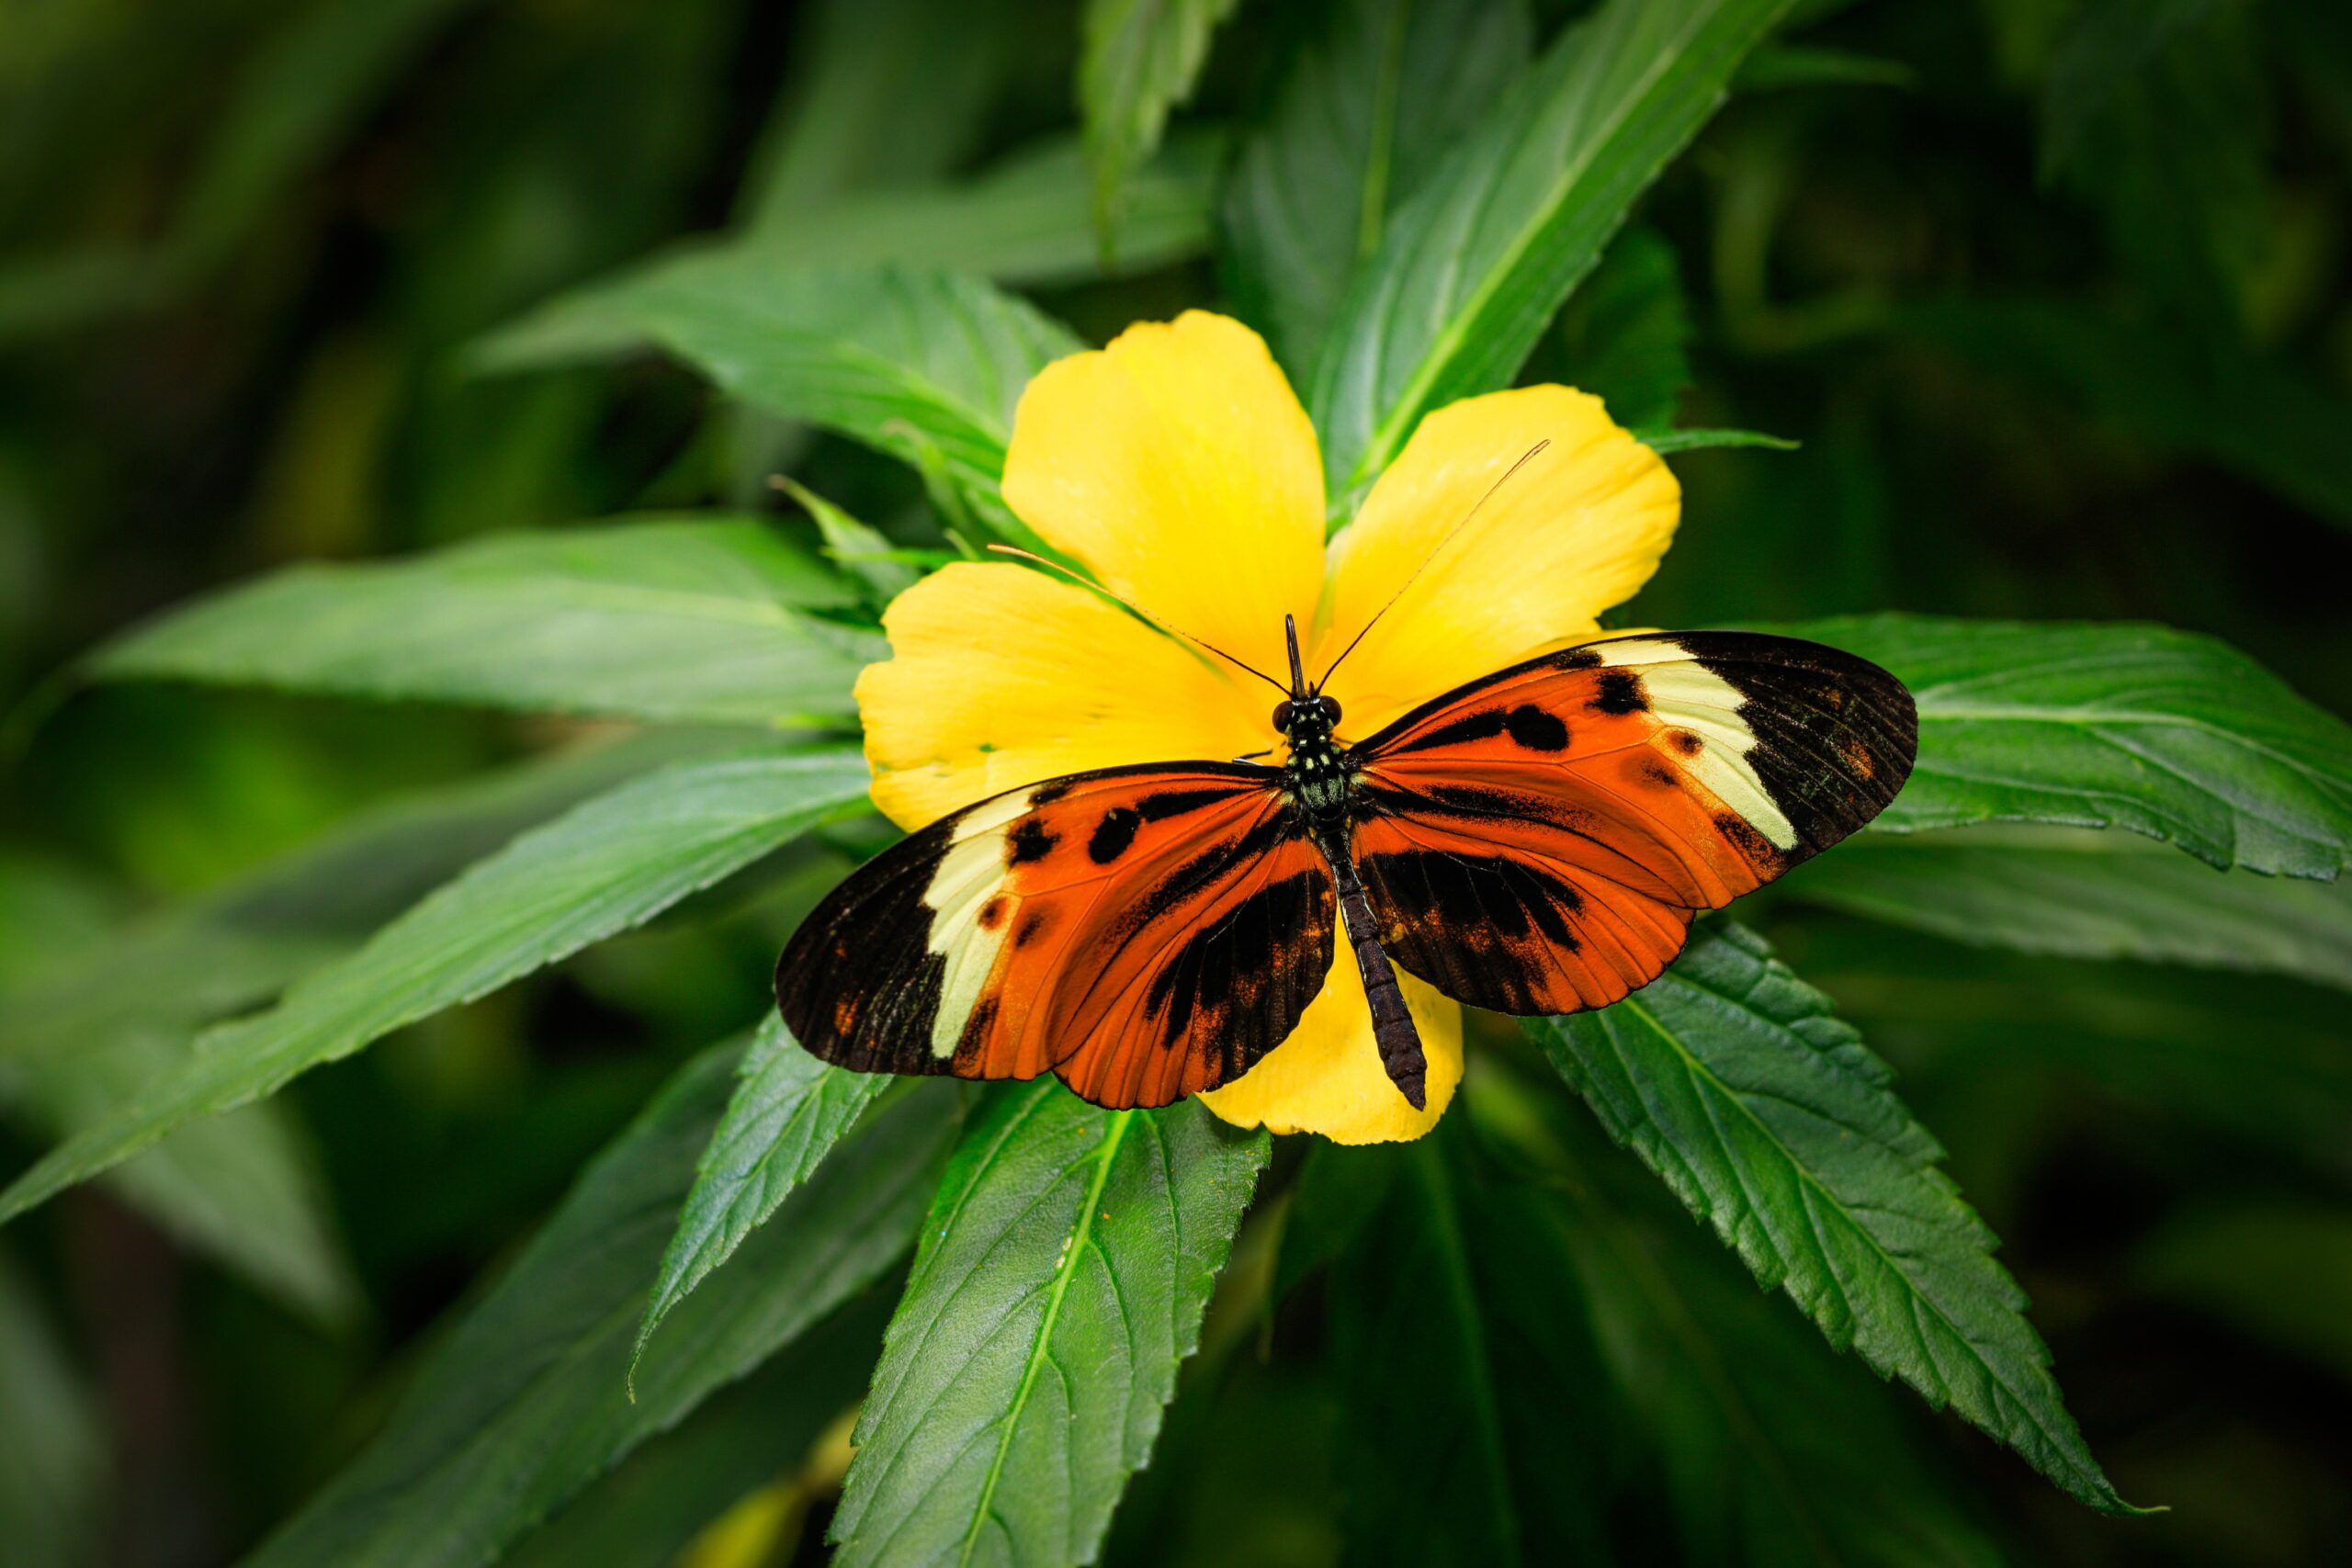 A black, orange and yellow butterfly sitting on a yellow flower with green leaves behind it.